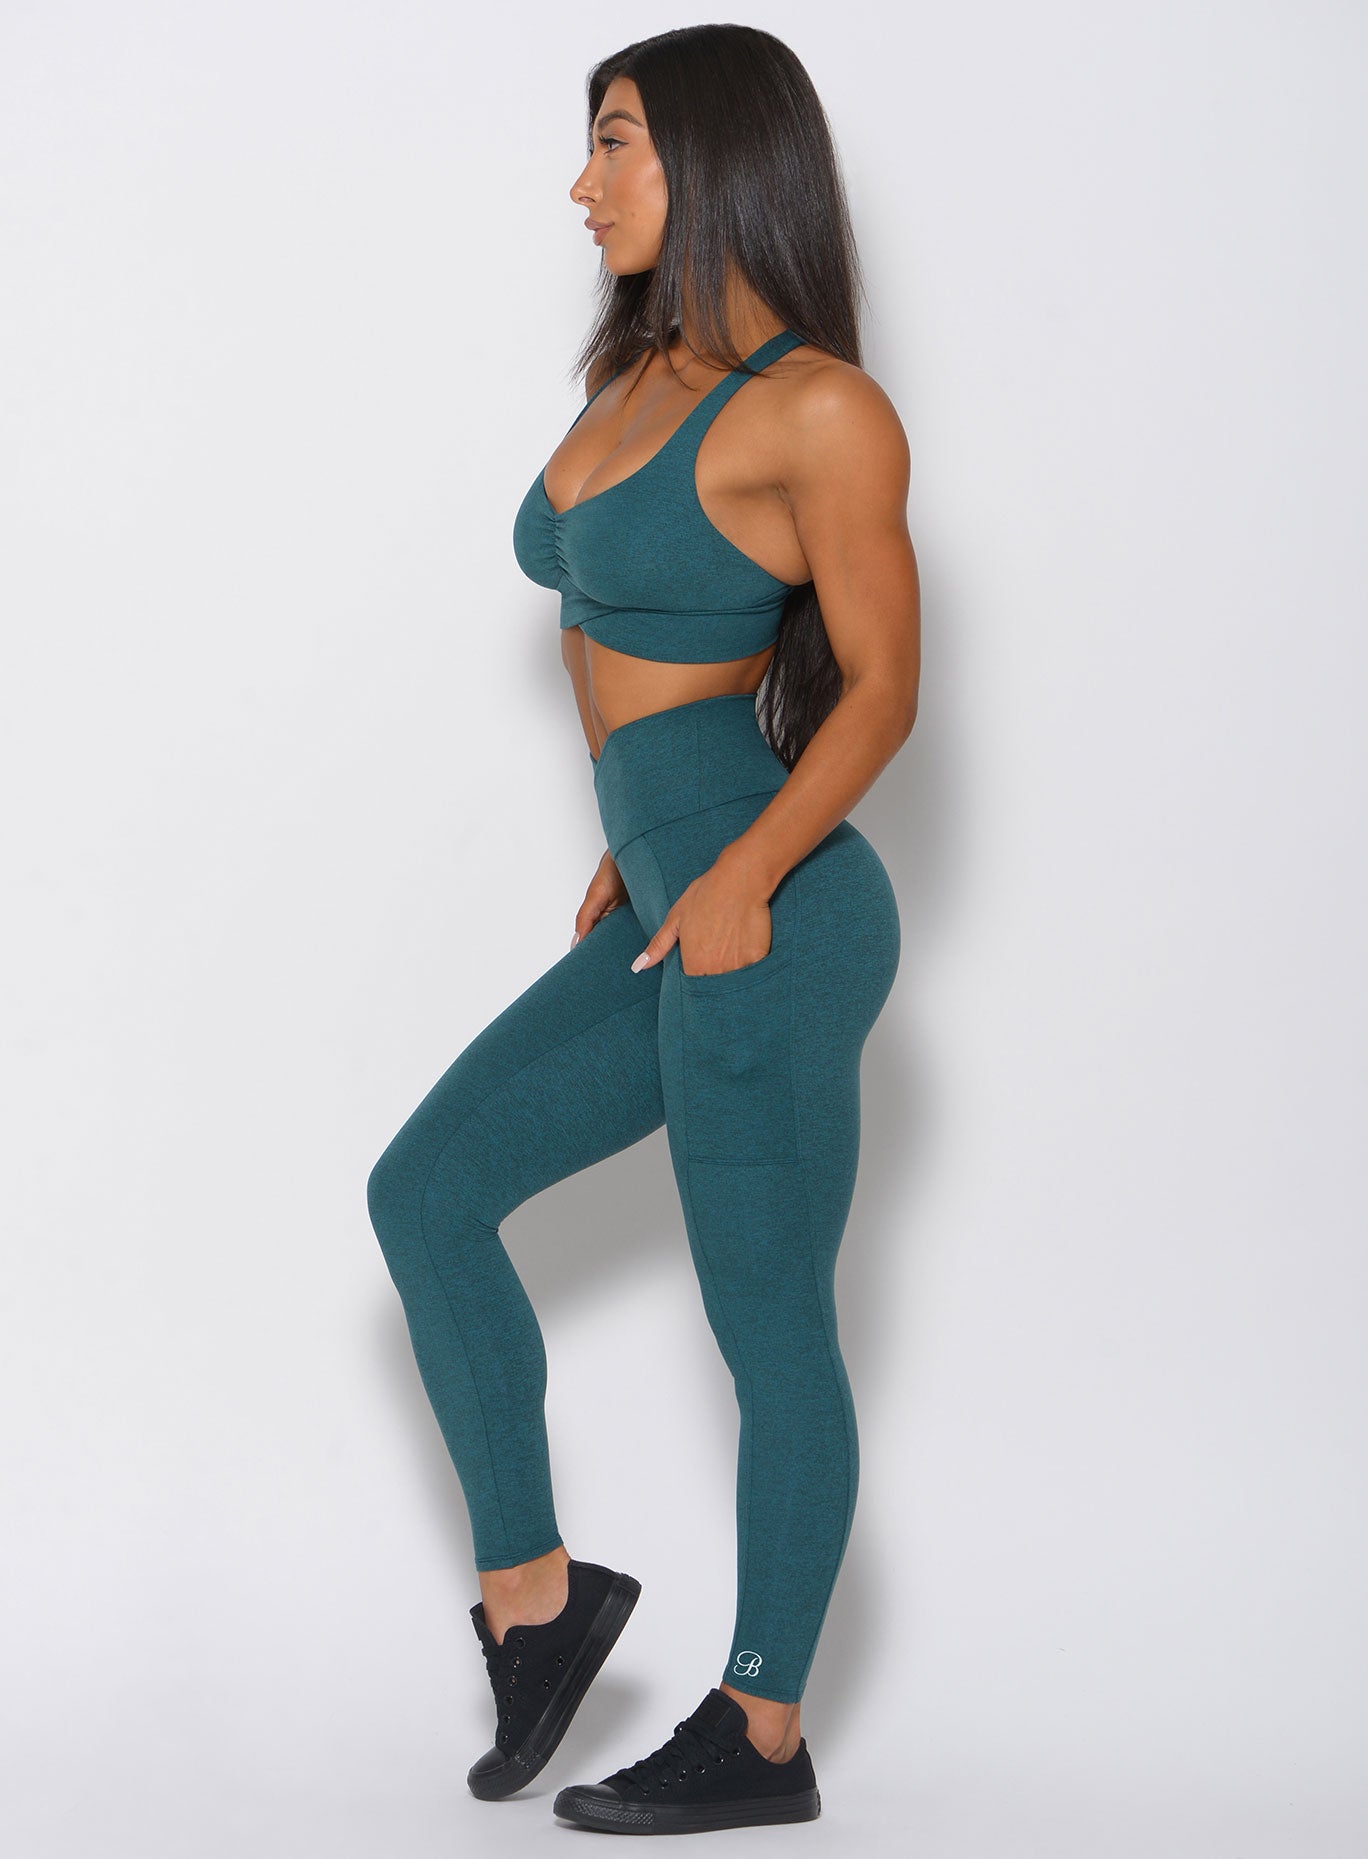 model in teal contour leggings facing left arms at side